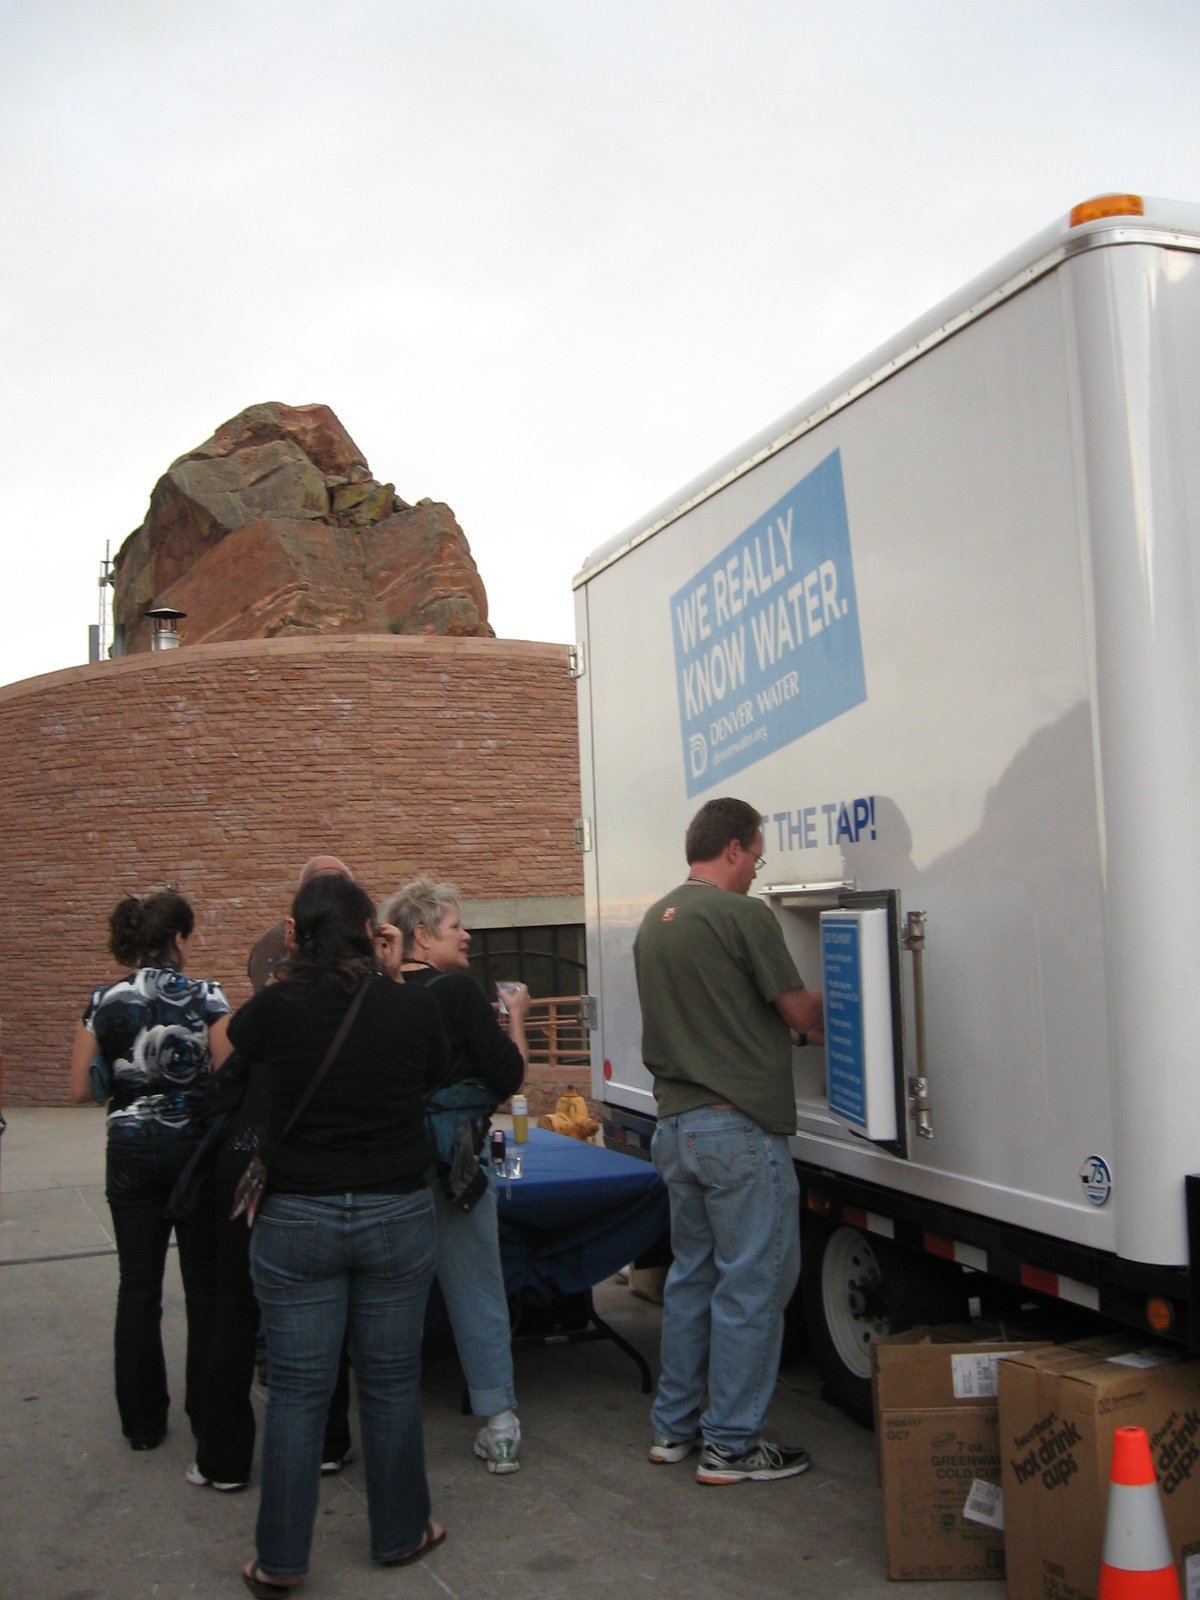 Denver Water’s water trailer was debuted during the 2008 Democratic National Convention, when it was used to hydrate convention goers at various events, including one at Red Rocks Amphitheatre, pictured here.